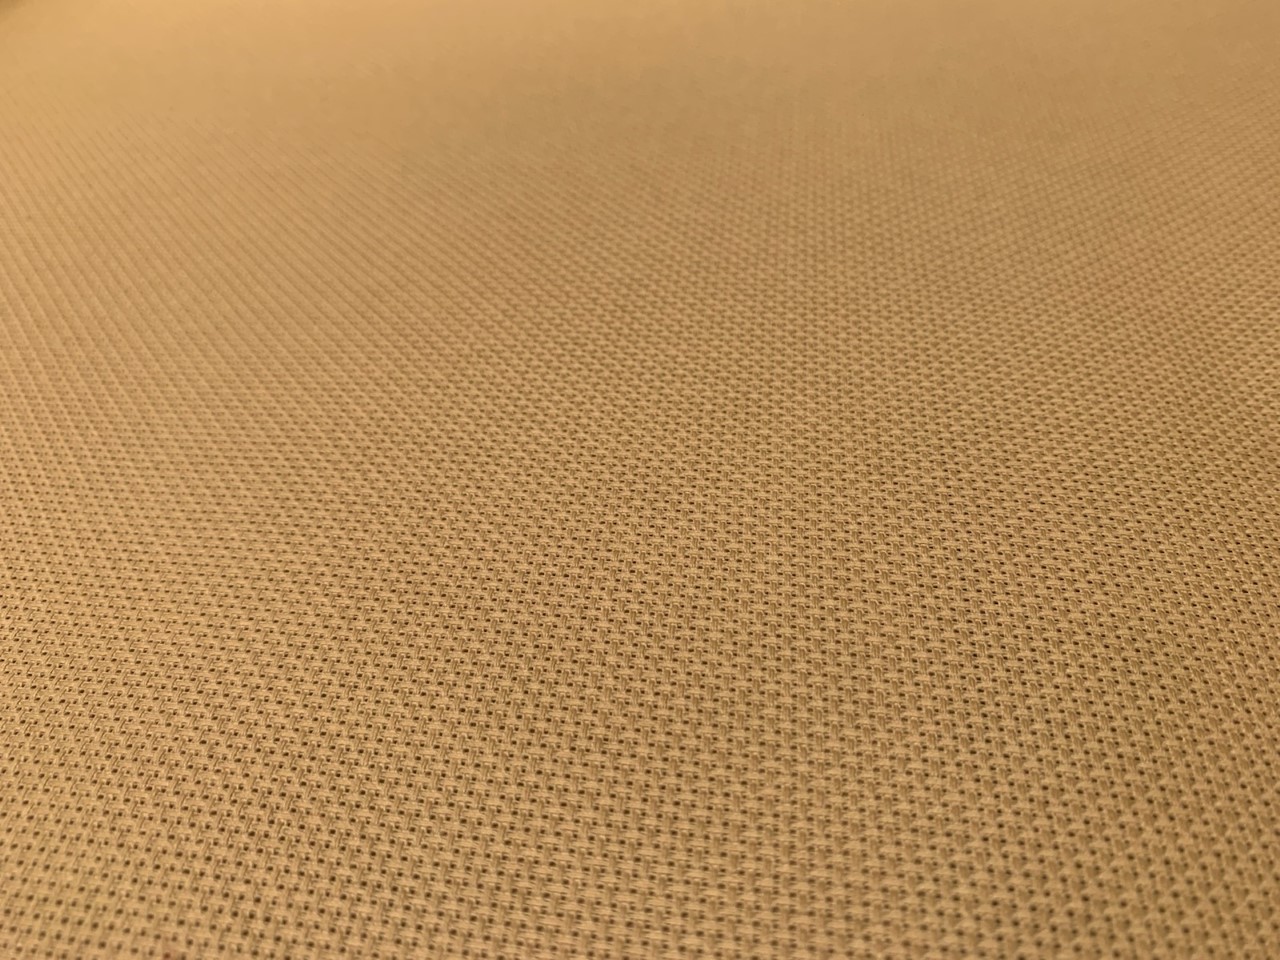 14 Count Aida Cloth - Tan 60" Wide By The Yard